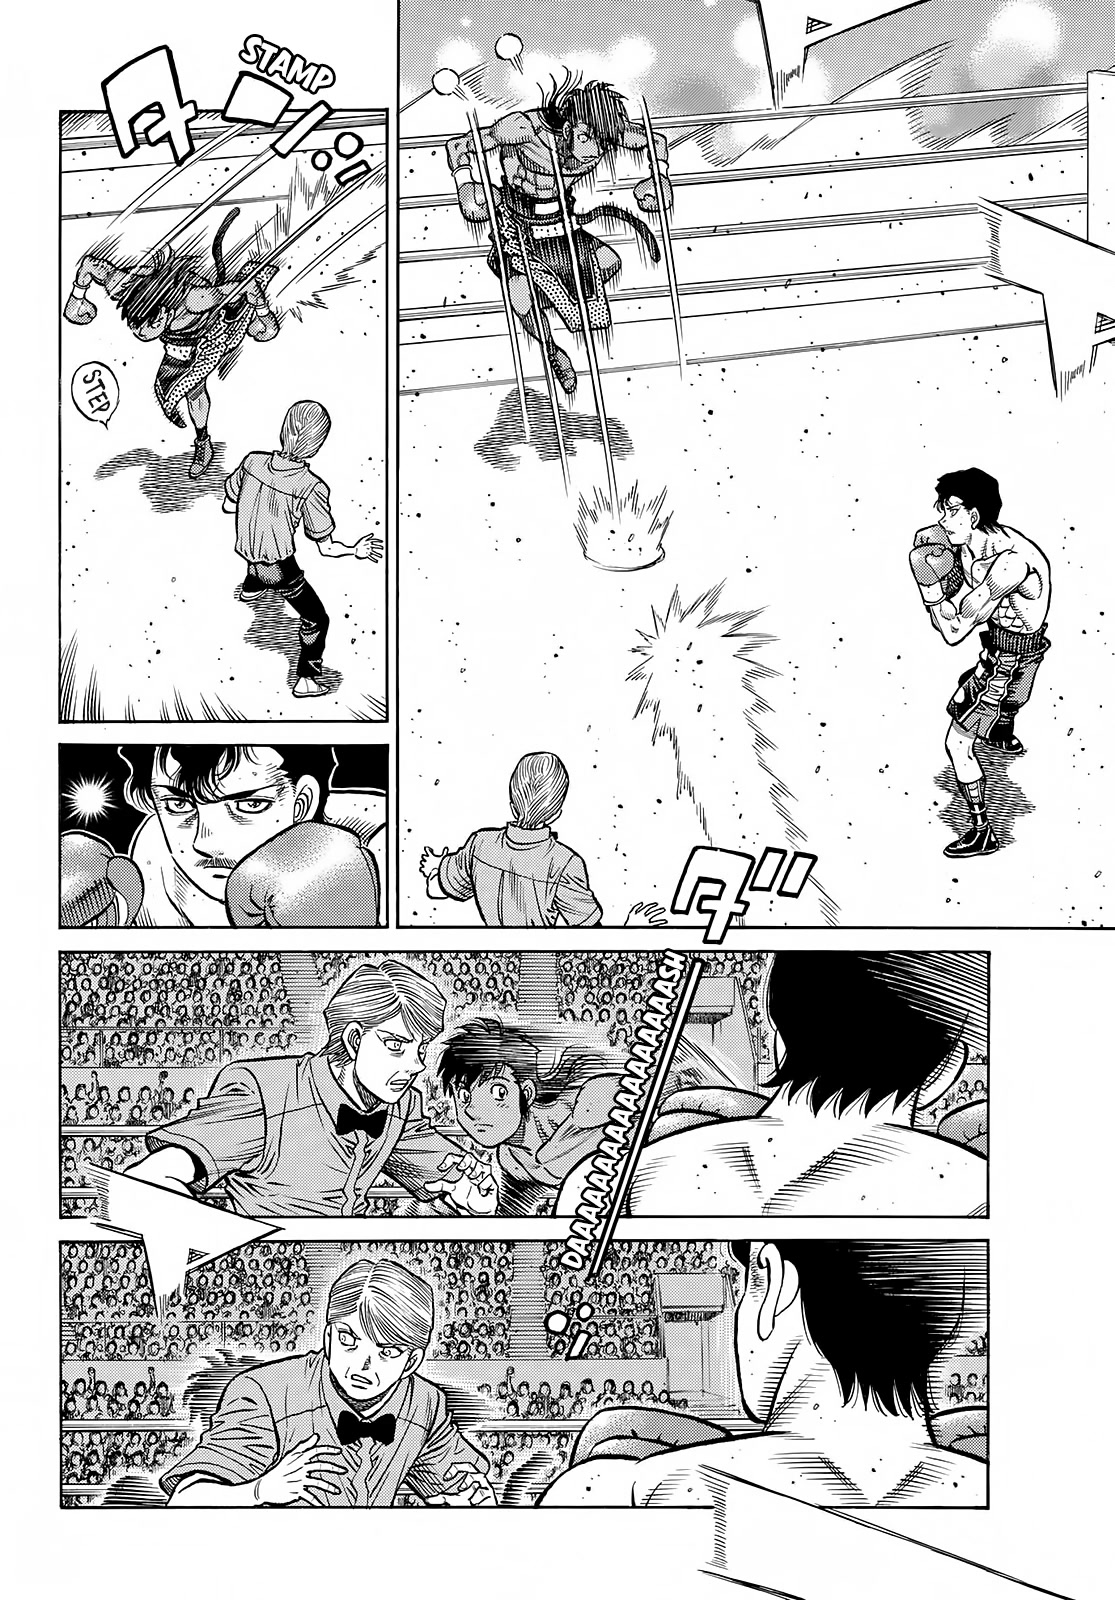 Hajime no Ippo, Chapter 1396 Unknown Boxing image 09